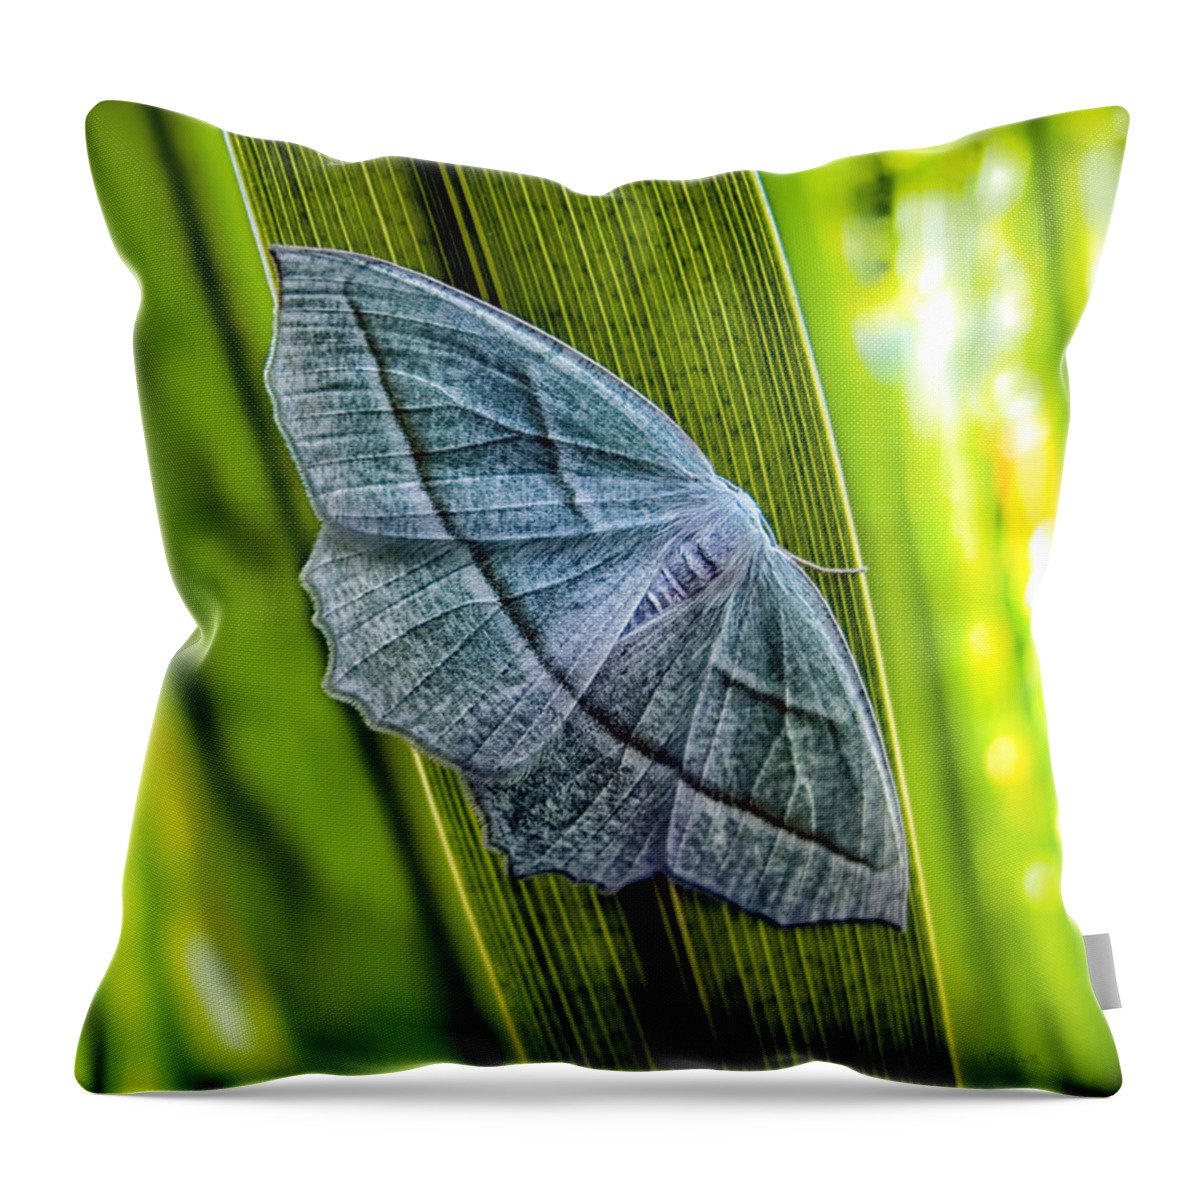 Butterfly Throw Pillow featuring the photograph Tiny Moth On A Blade of Grass by Bob Orsillo